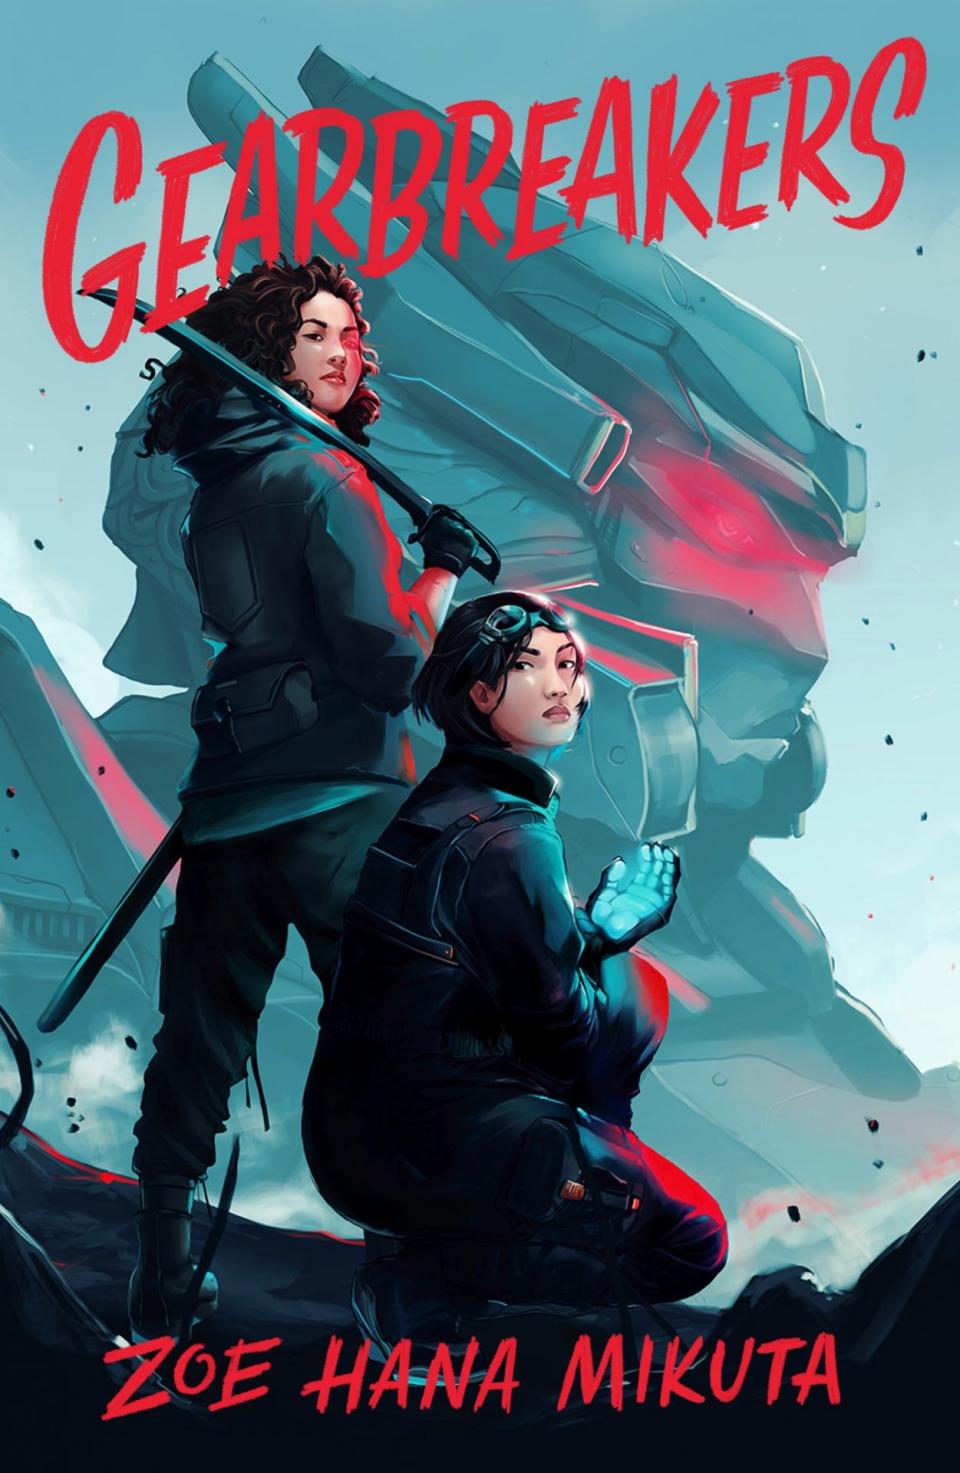 The cover for Gearbreakers shows two women in front of a giant mech, one stands holding a sword and the other kneels